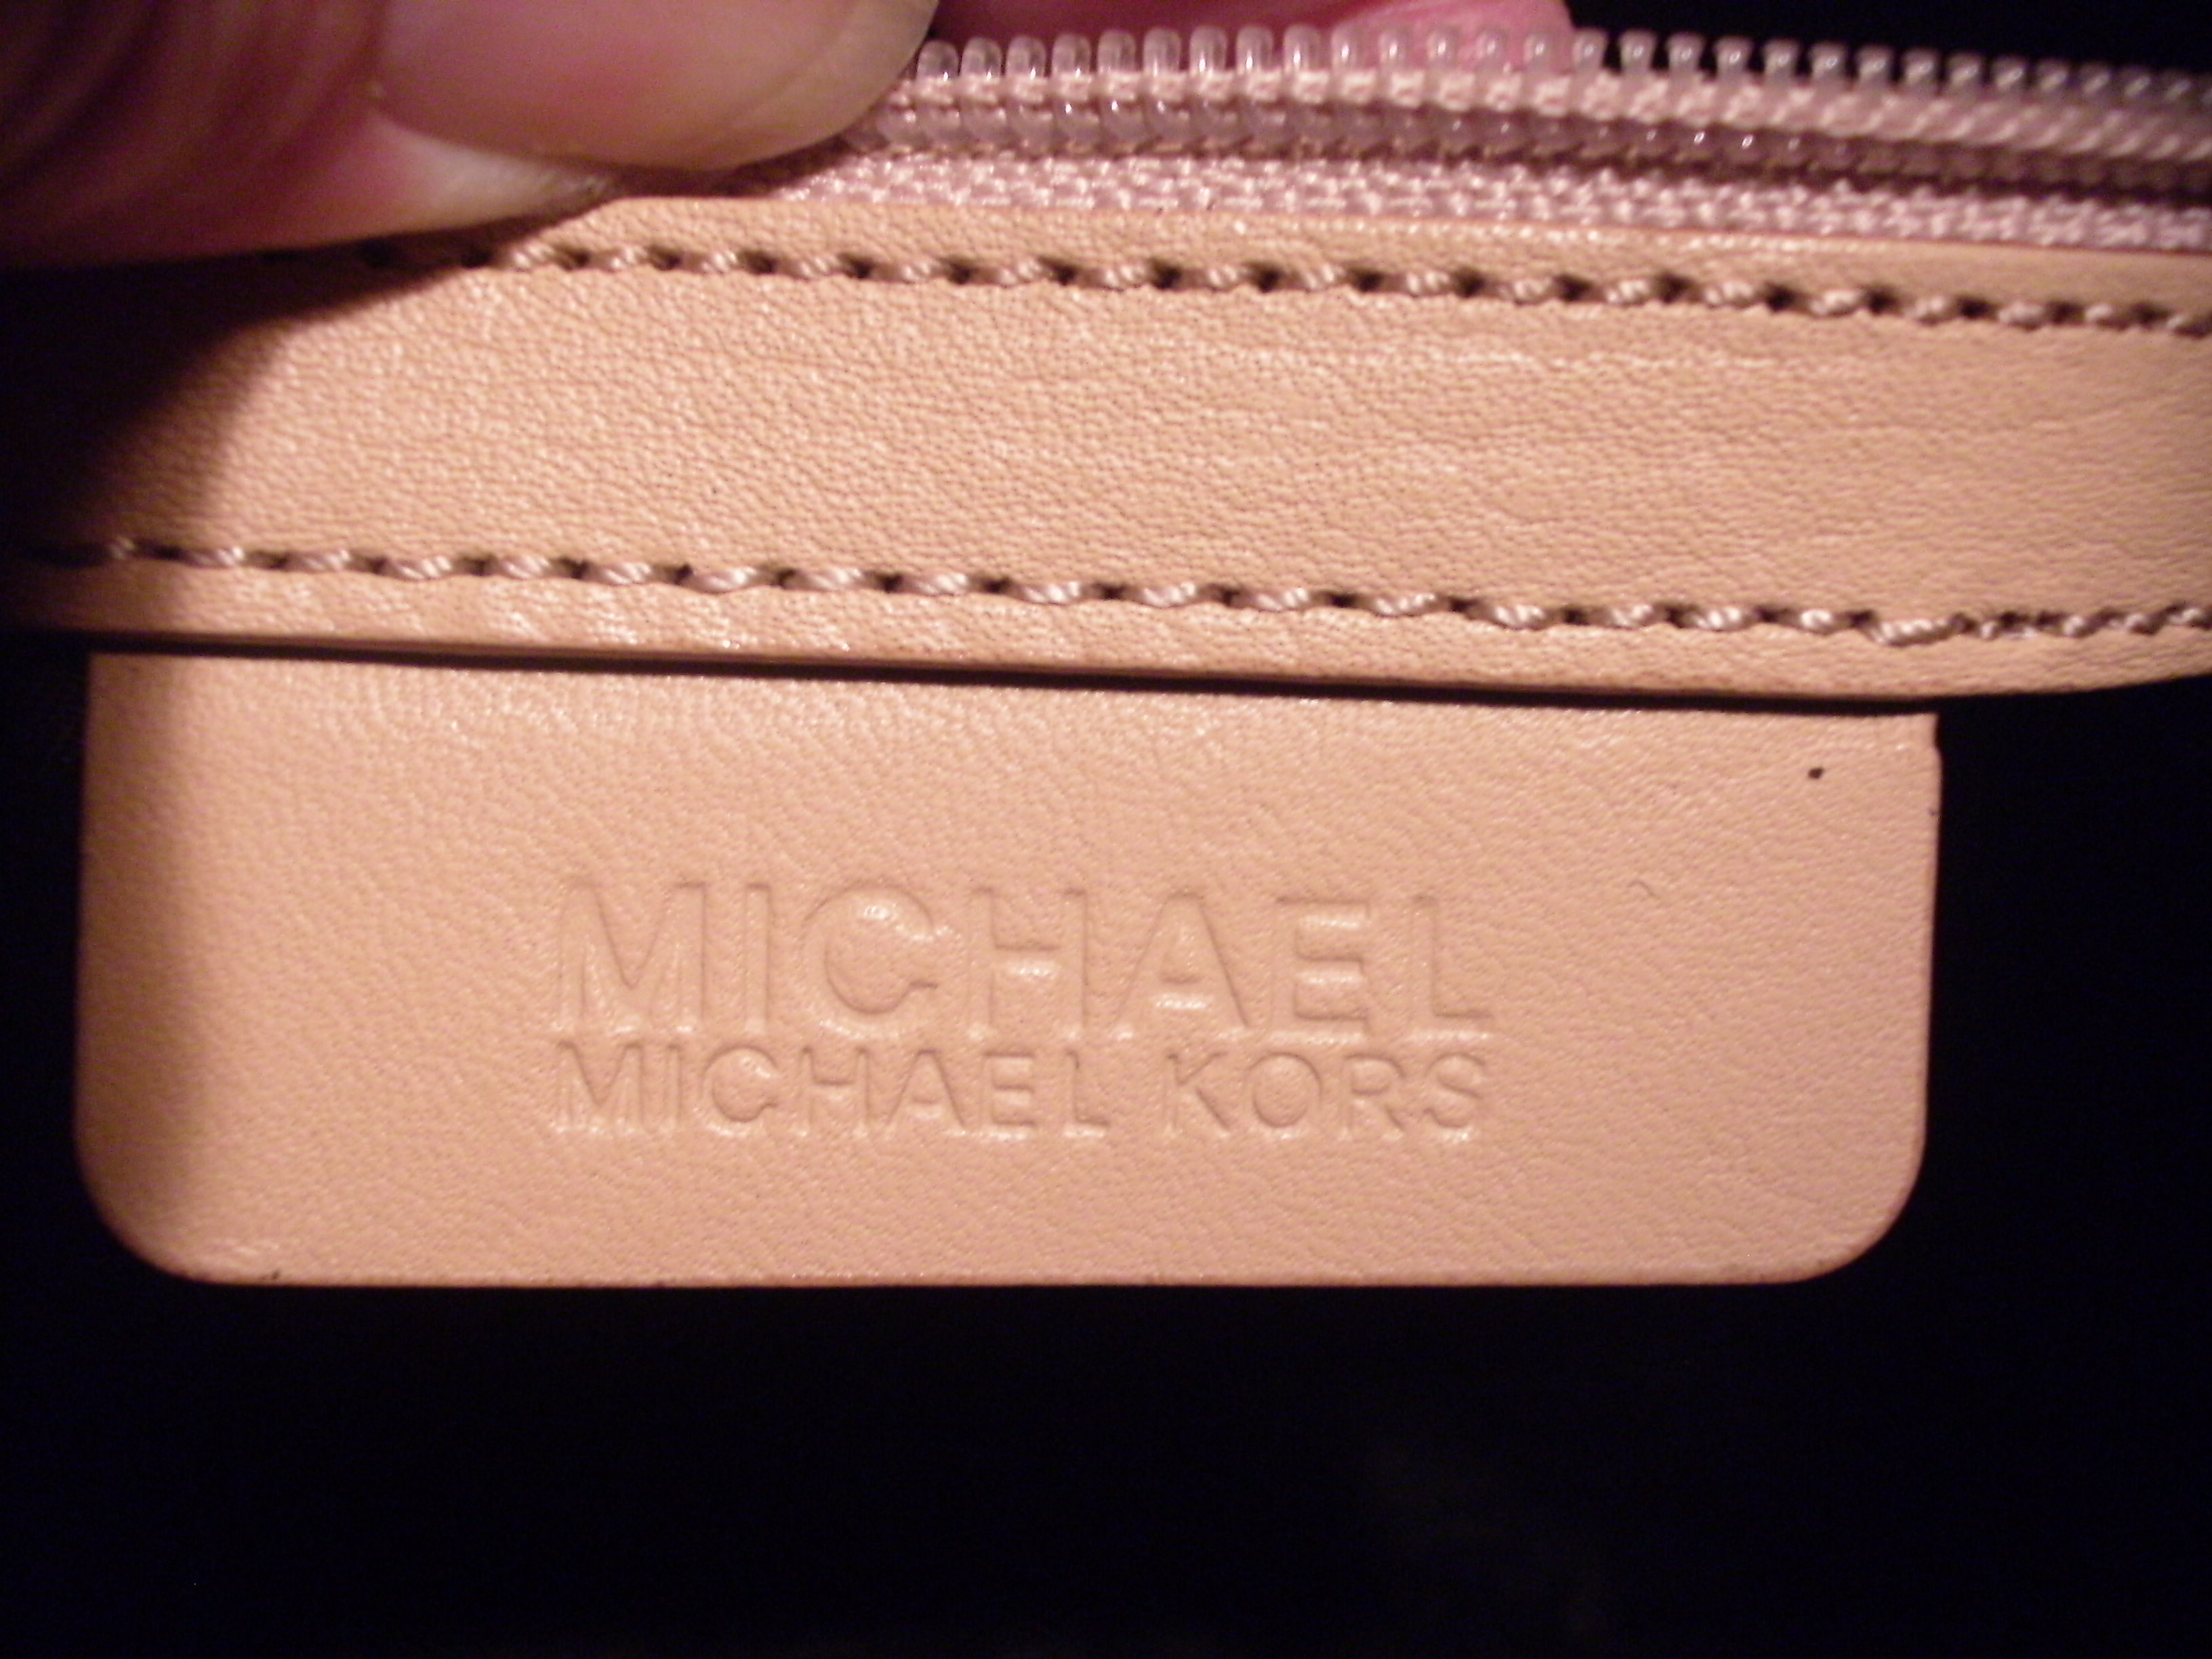 michael kors made in china purse